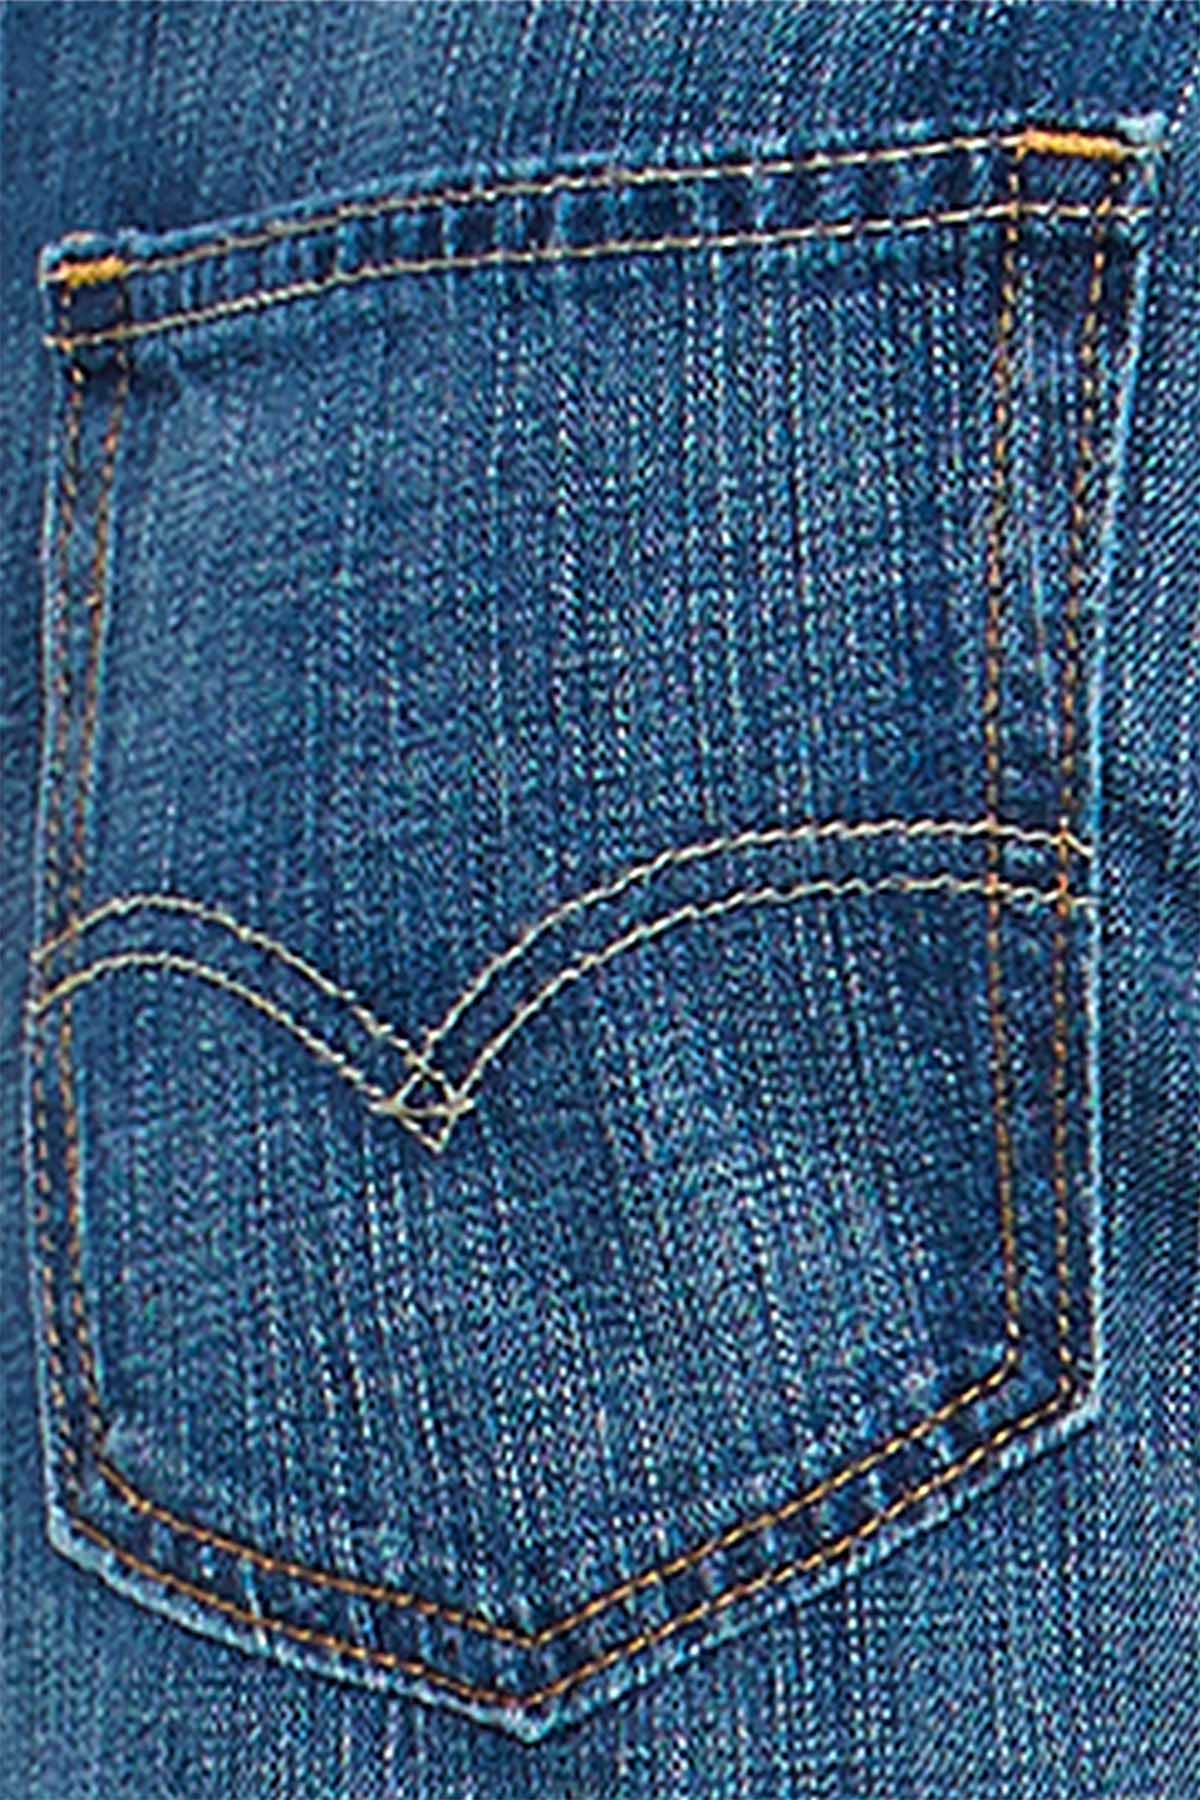 Levi's Indie Blue 559™ Big/Tall Relaxed Straight Leg Jean